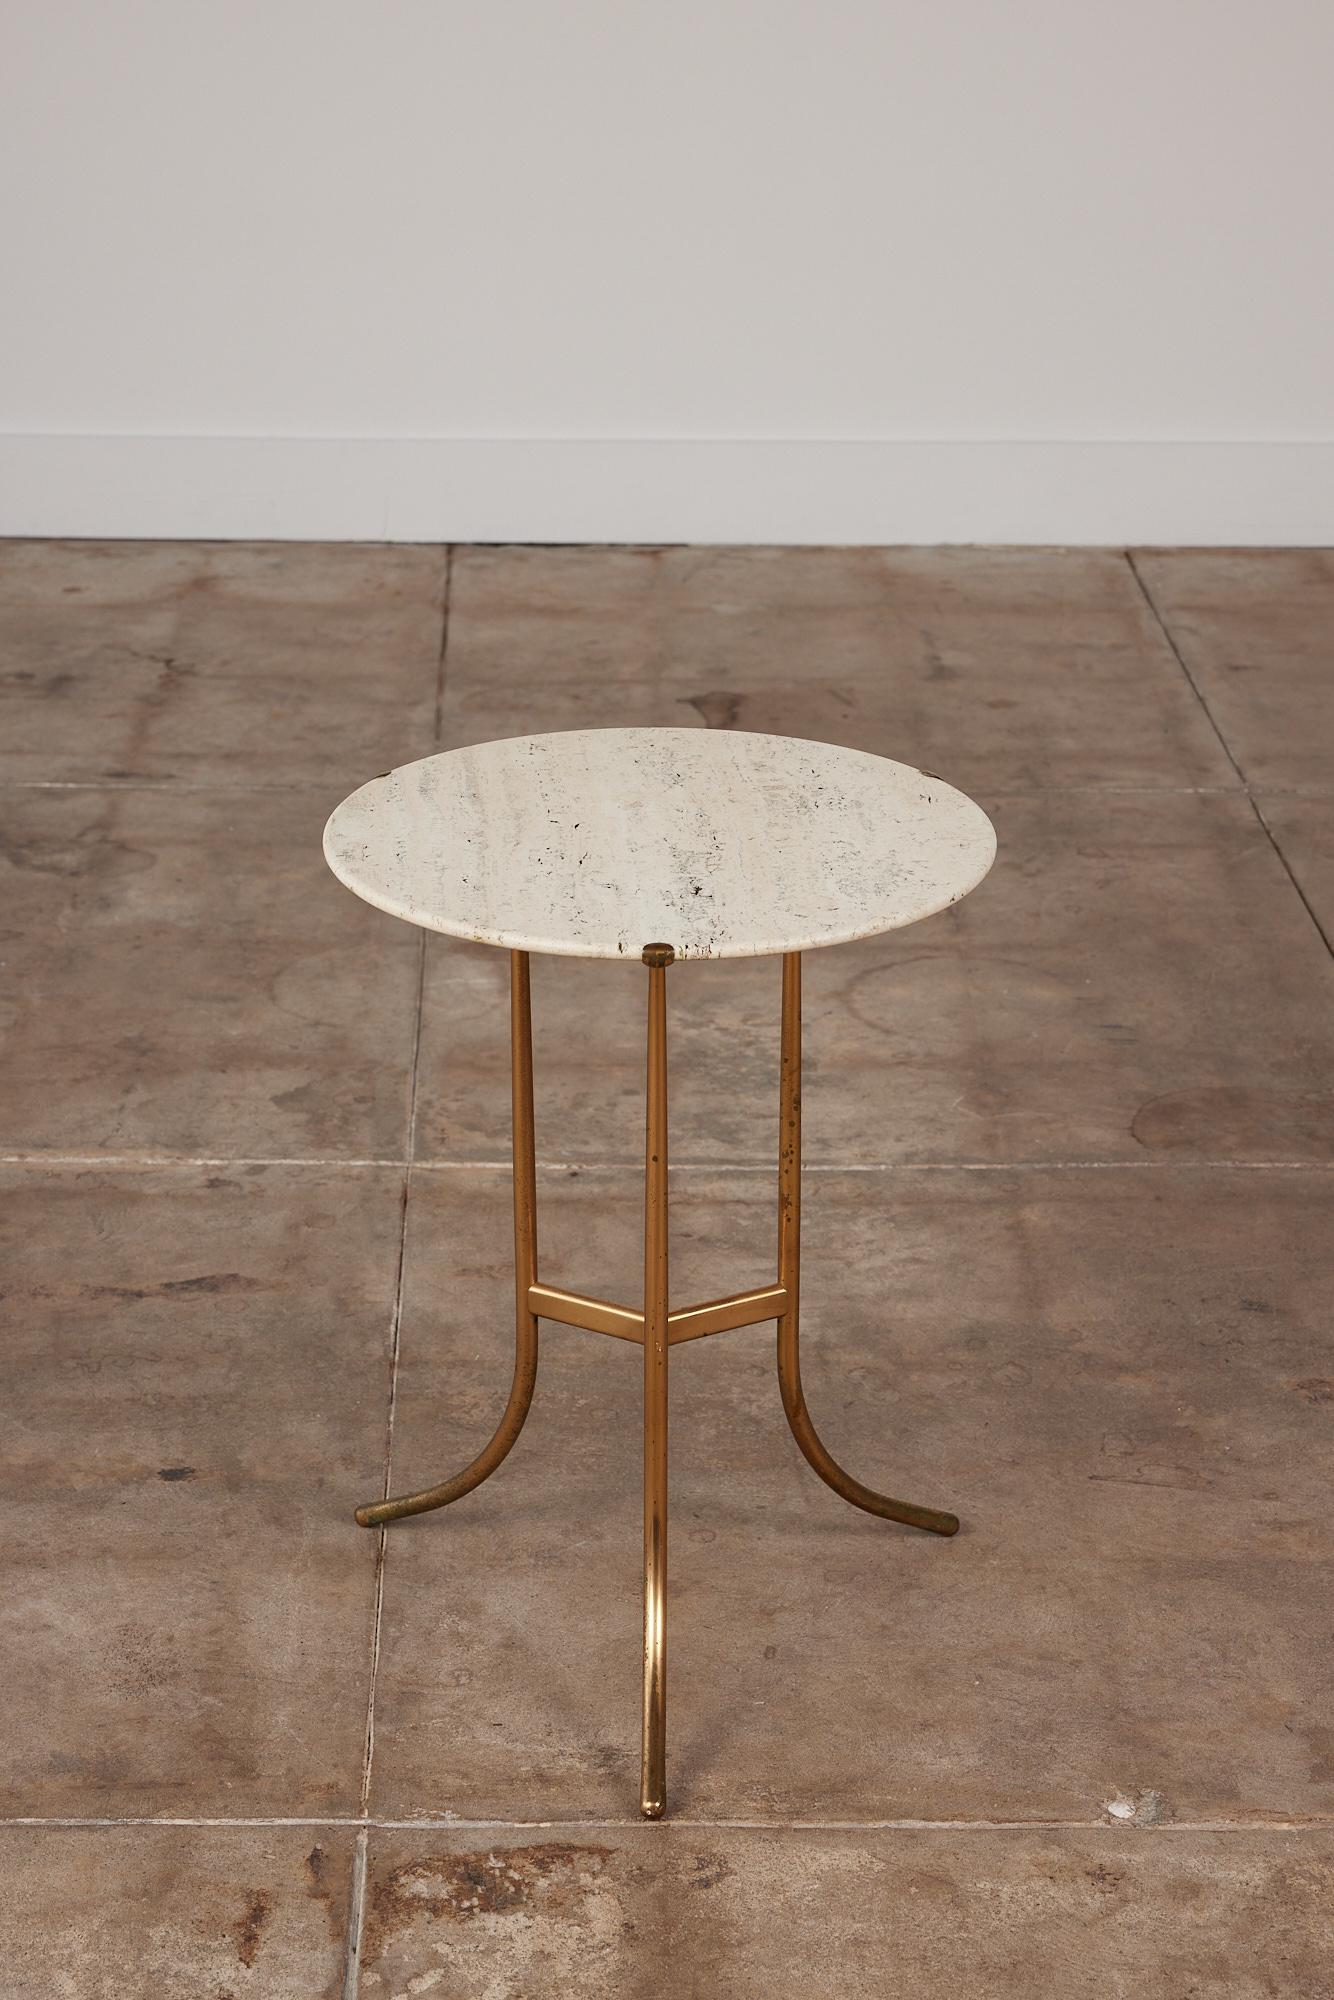 Cedric Hartman brass and travertine side table c. 1970s, USA. A round travertine stone top rests inside three delicate brass prongs. The table features a pedestal base with three splayed legs, minimal yet elegant.

Dimensions: 17